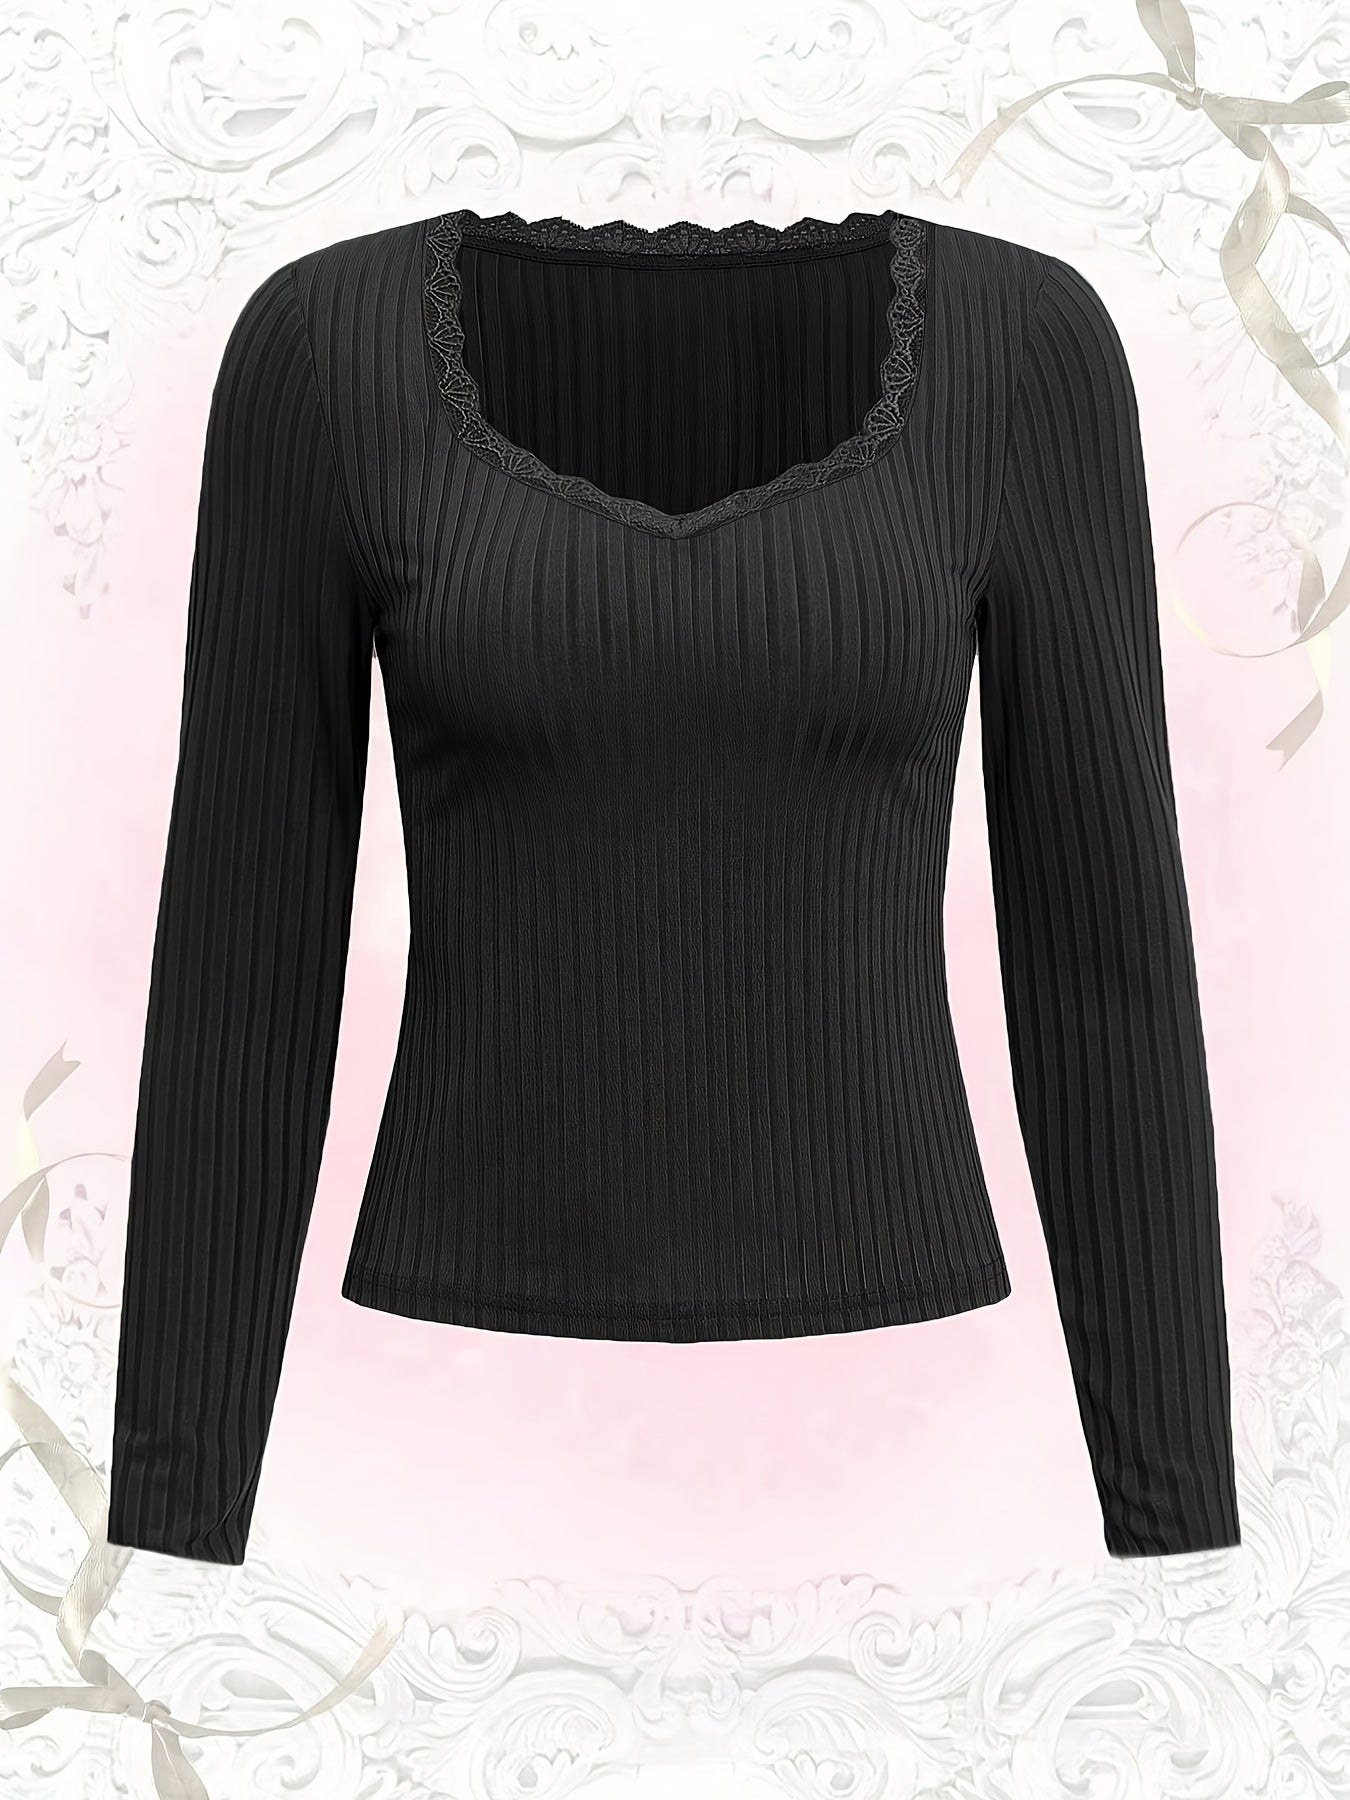 Antmvs Plus Size Basic Thermal Top, Women's Plus Ribbed Contrast Lace Trim Long Sleeve Sweetheart Neck Slim Fit Tee